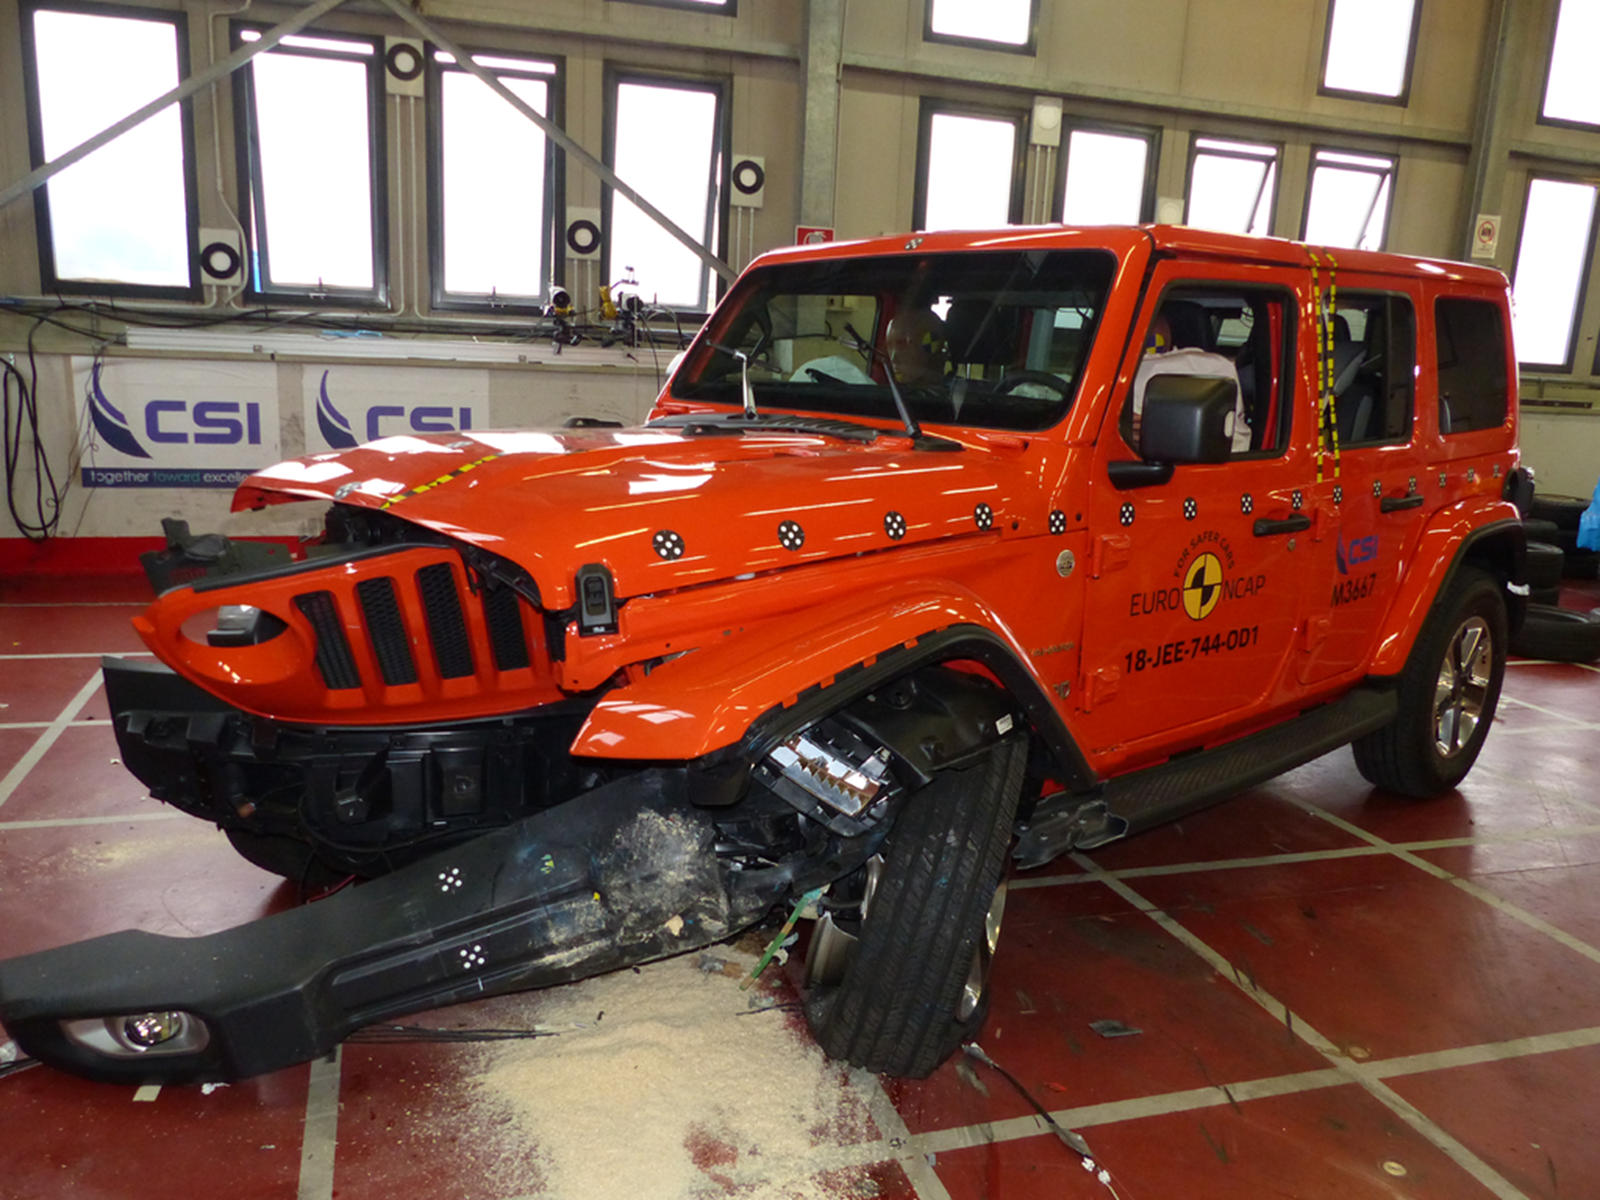 Jeep Wrangler Gets Another Terrible Crash Test Rating | CarBuzz